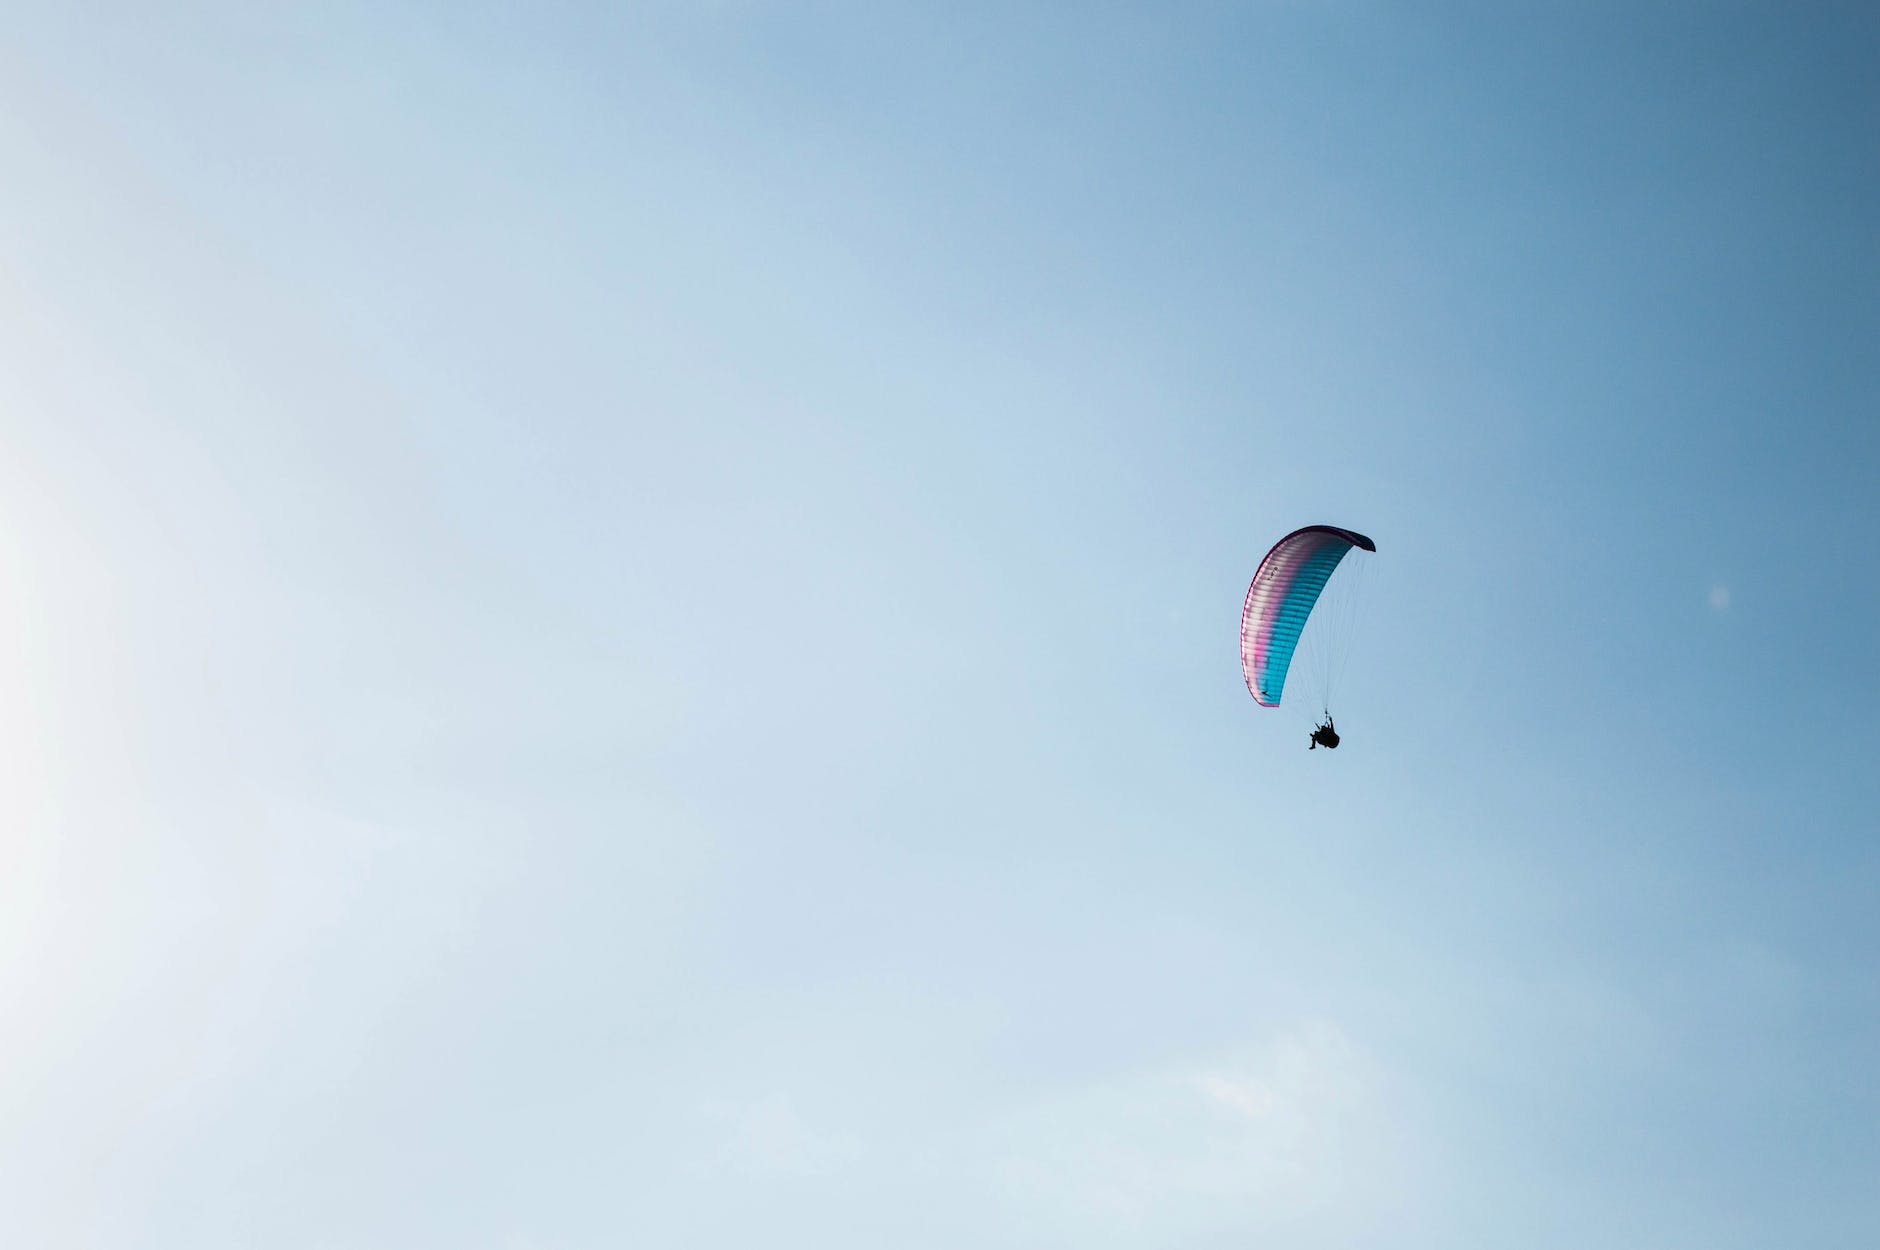 photo of a person paragliding